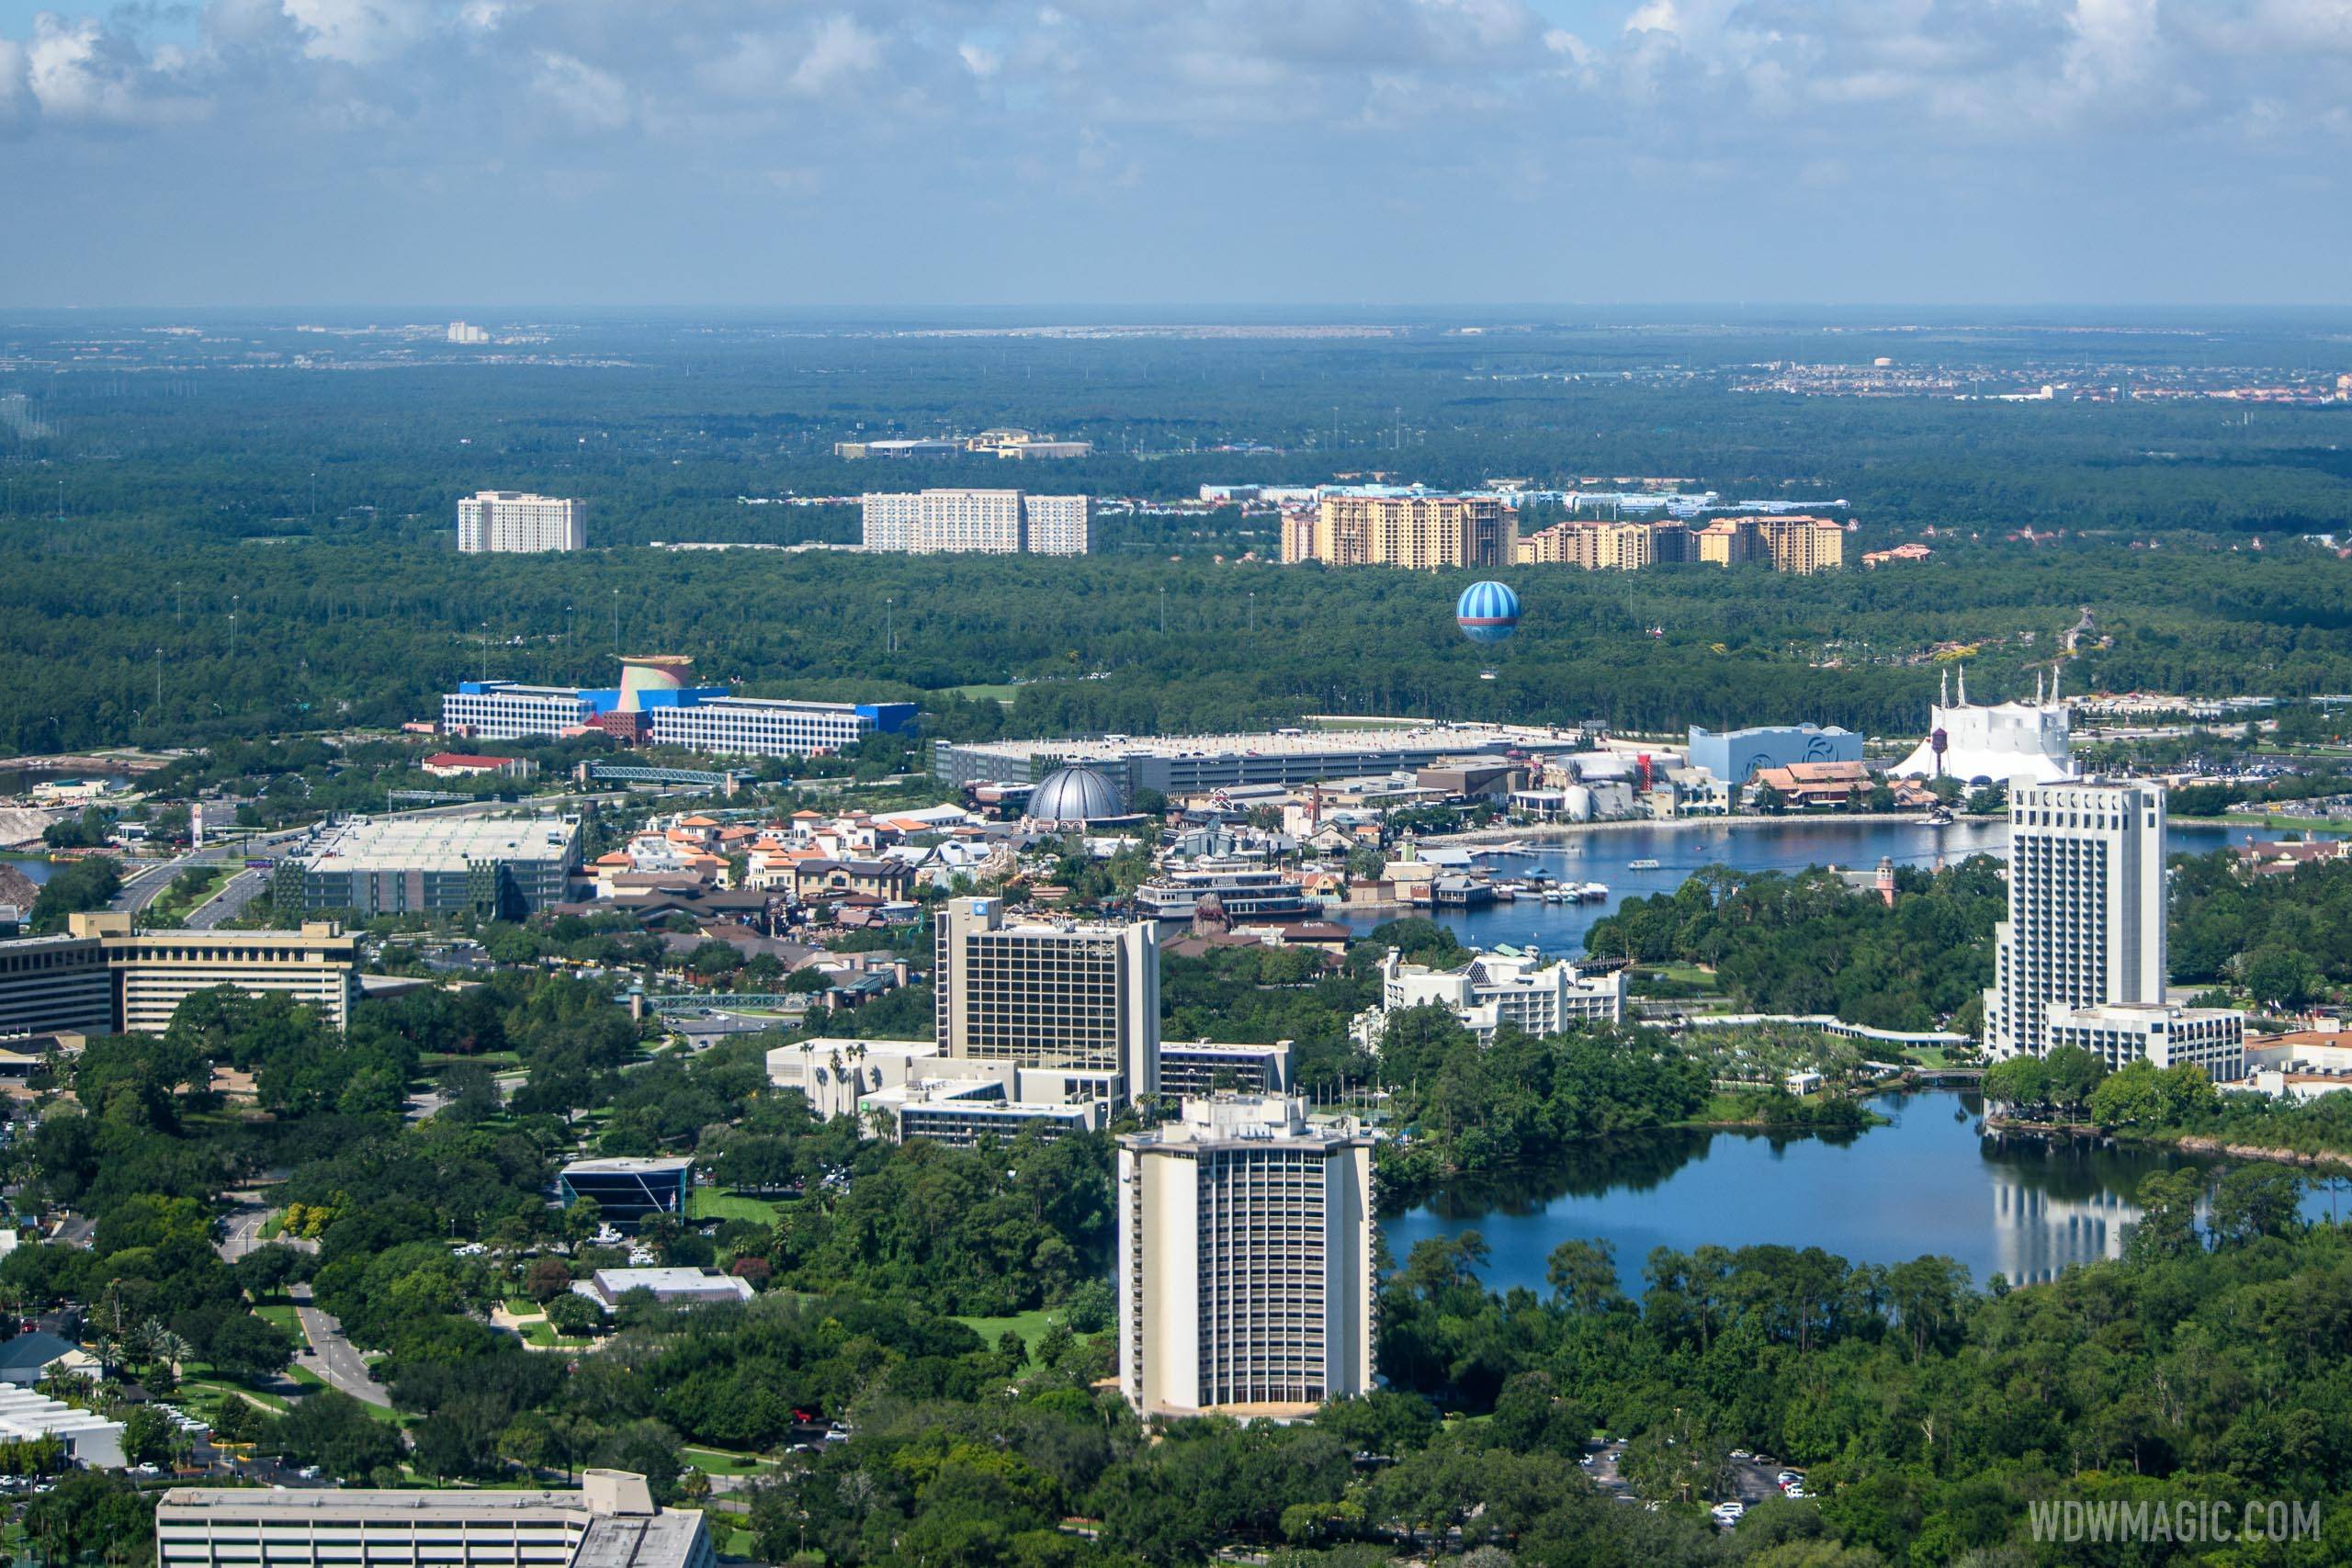 Aerial view of the Disney Springs Resort area hotels on Hotel Plaza Blvd